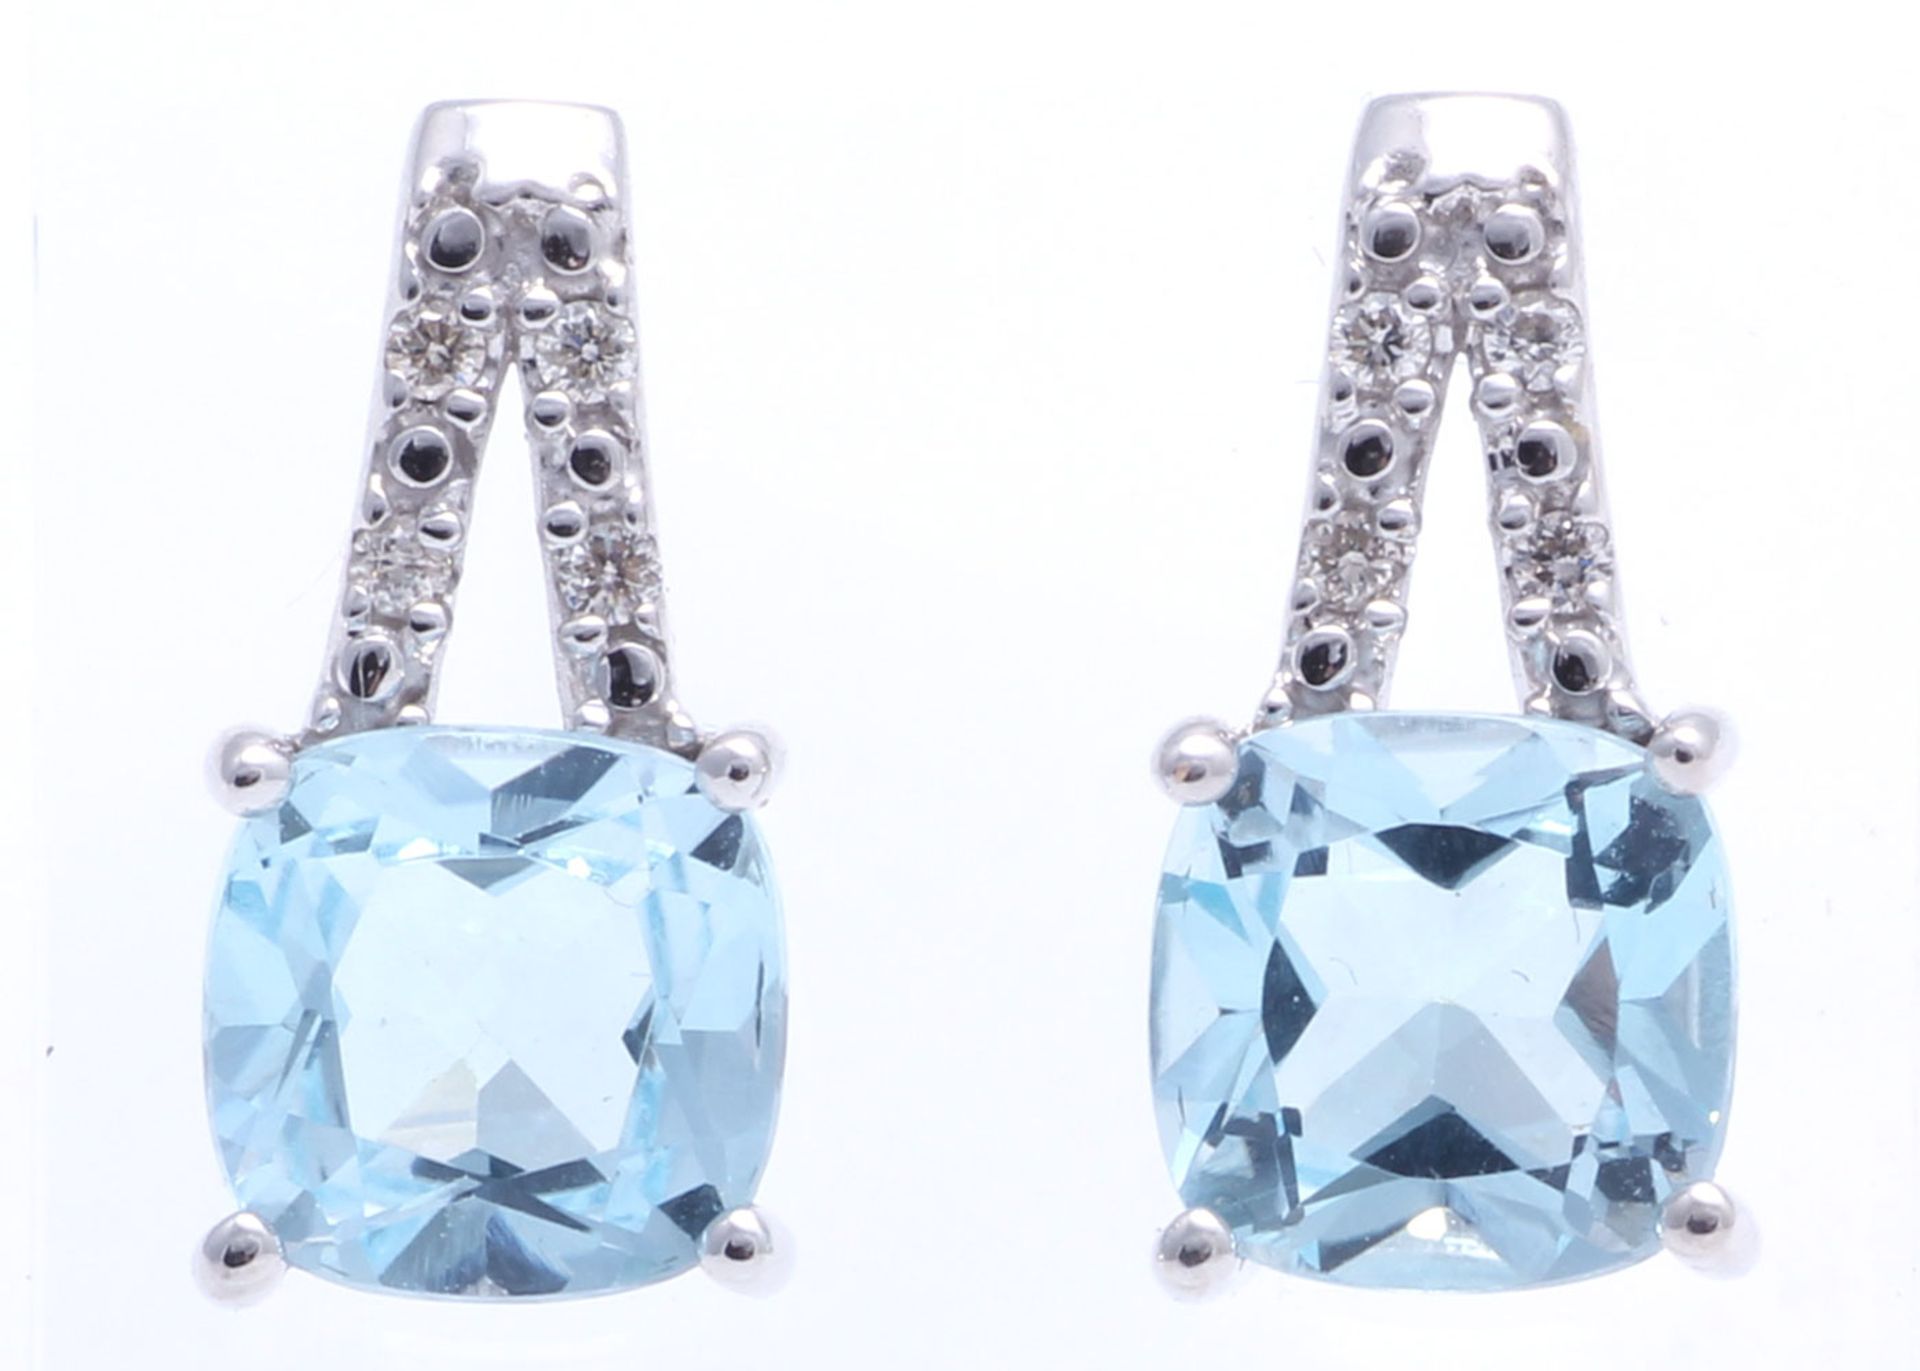 9ct White Gold Diamond And Blue Topaz Earrings - Valued By GIE £1,445.00 - Two gorgeous Blue Topaz